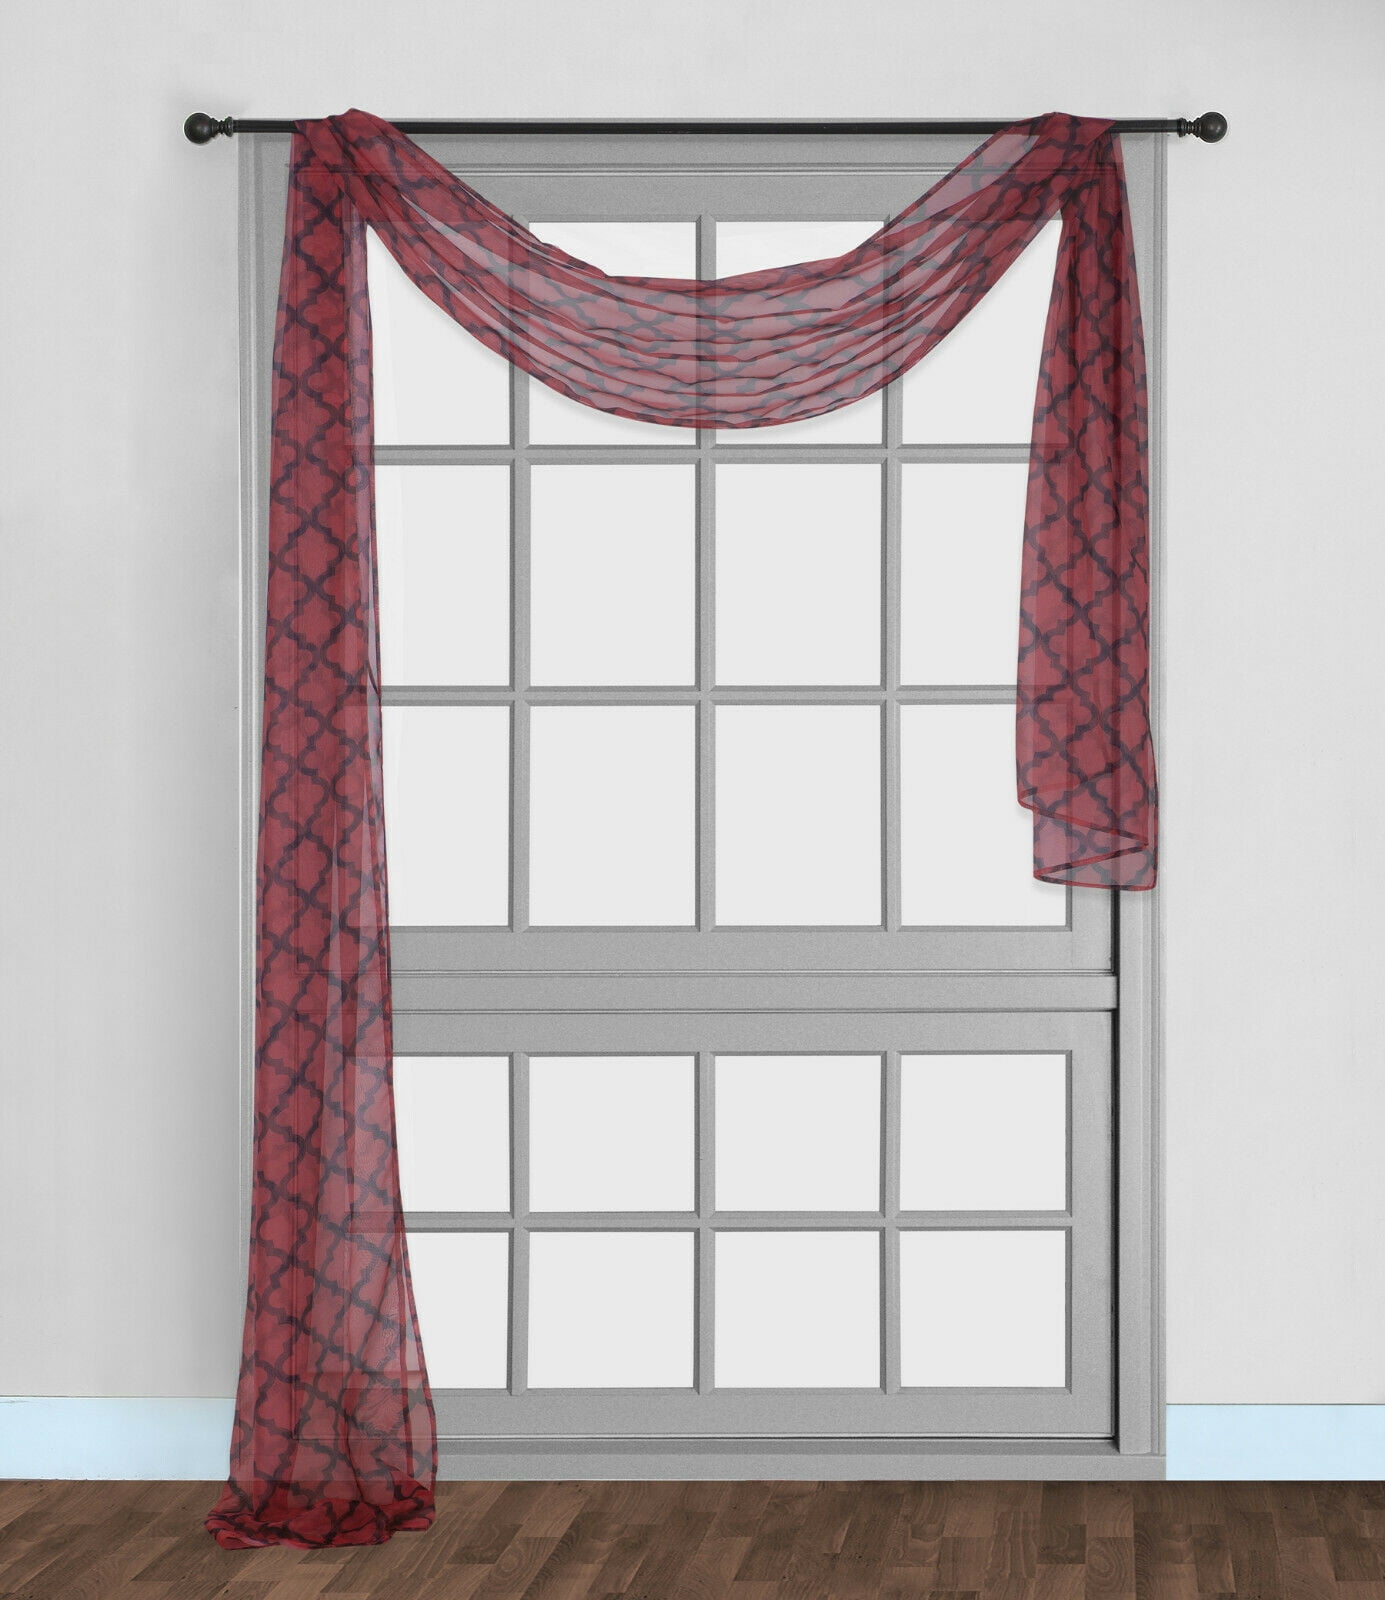 S38 1PC SINGLE STYLE GROMMET TOP VALANCE/PANEL WINDOW CURTAIN VOILE SHEER 